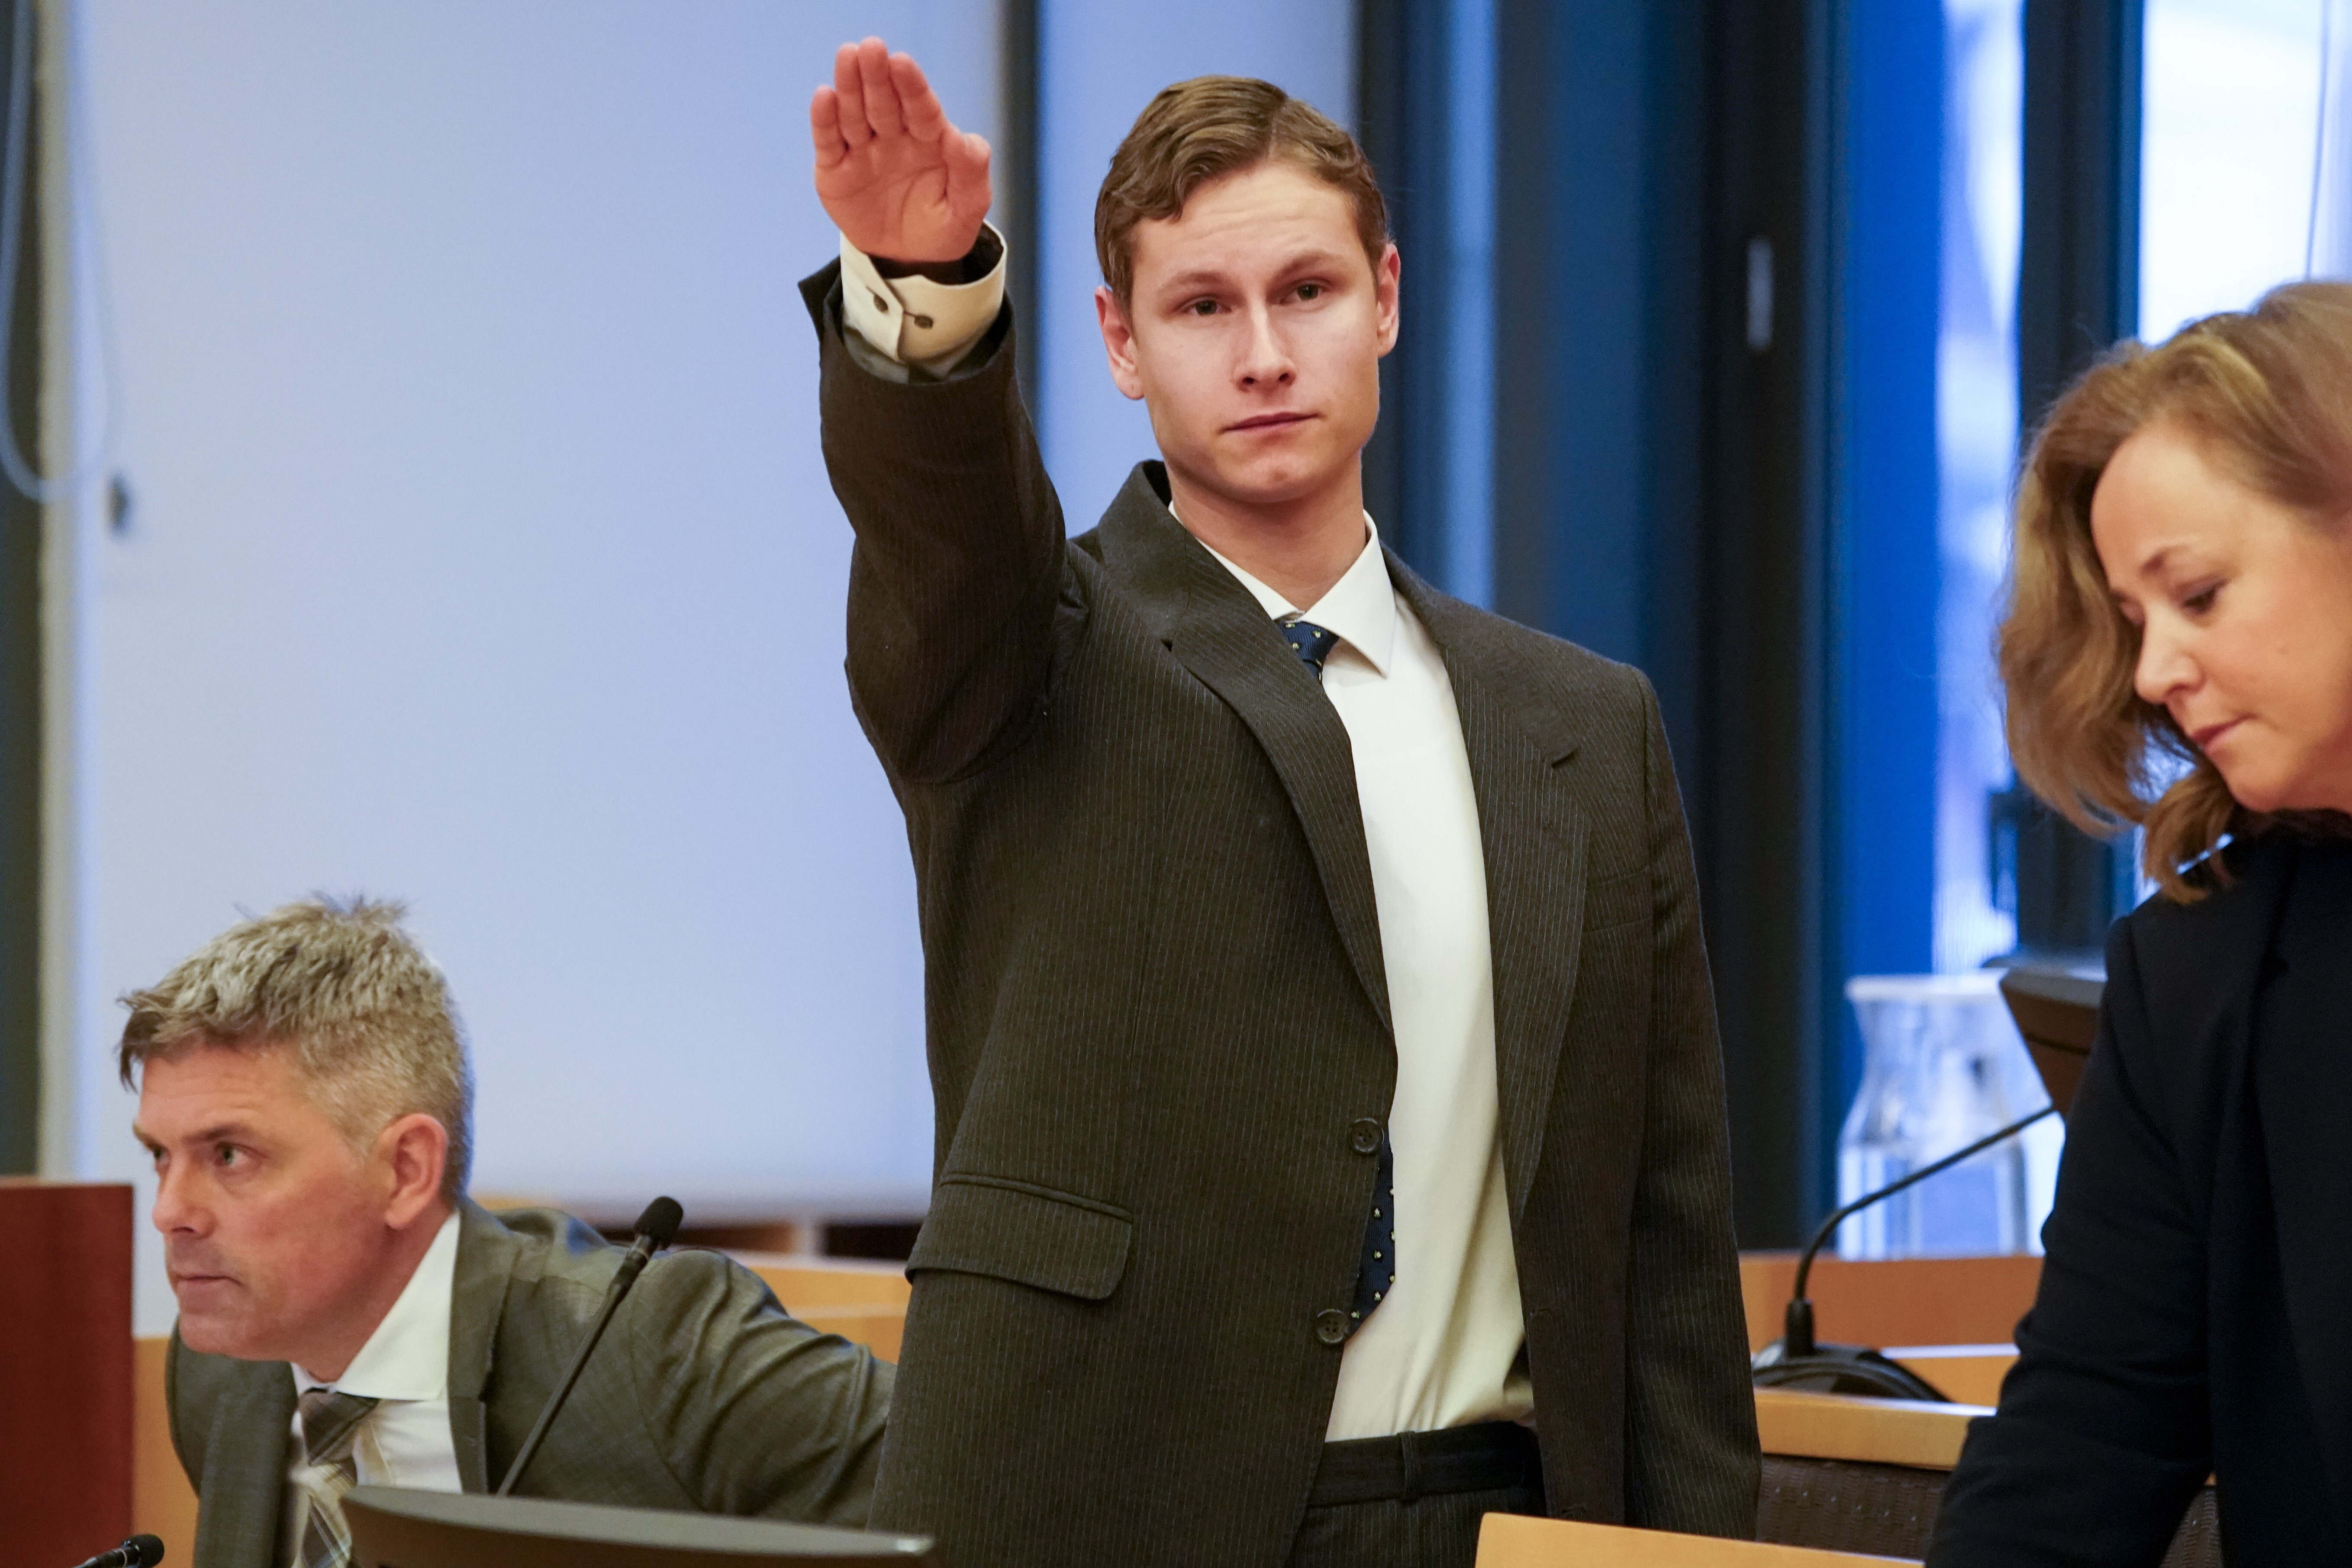 Philip Manshaus flashes the Nazi salute during his trial. Photo: dpa